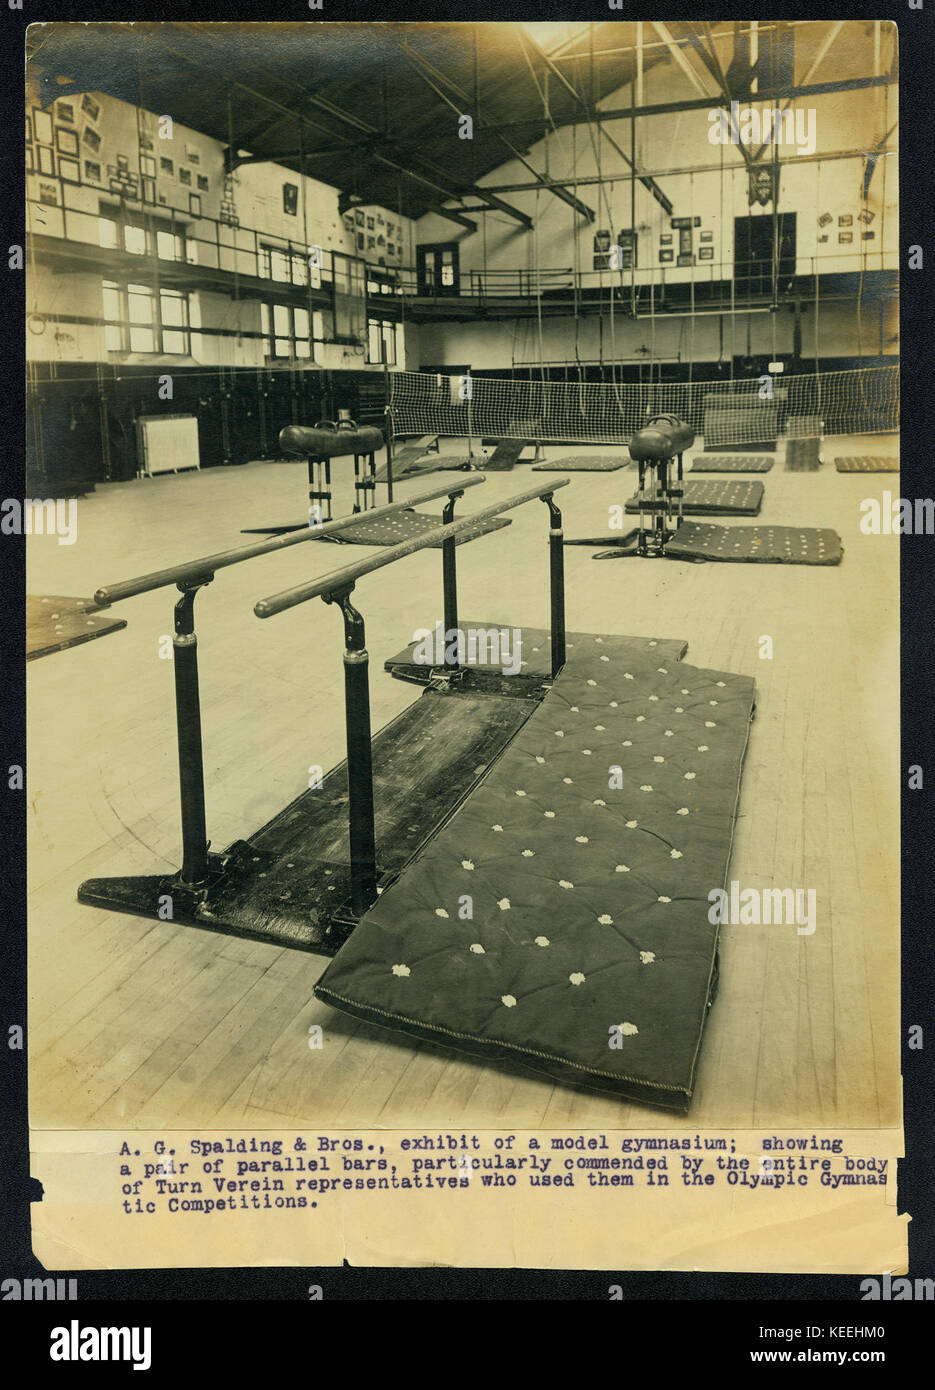 A. G. Spalding and Bros., exhibit of a model gymnasium; showing a pair of parallel bars, particularly commended by the entire body of Turn Verein representatives who used them in the Olympic Gymnastic Competitions. Stock Photo